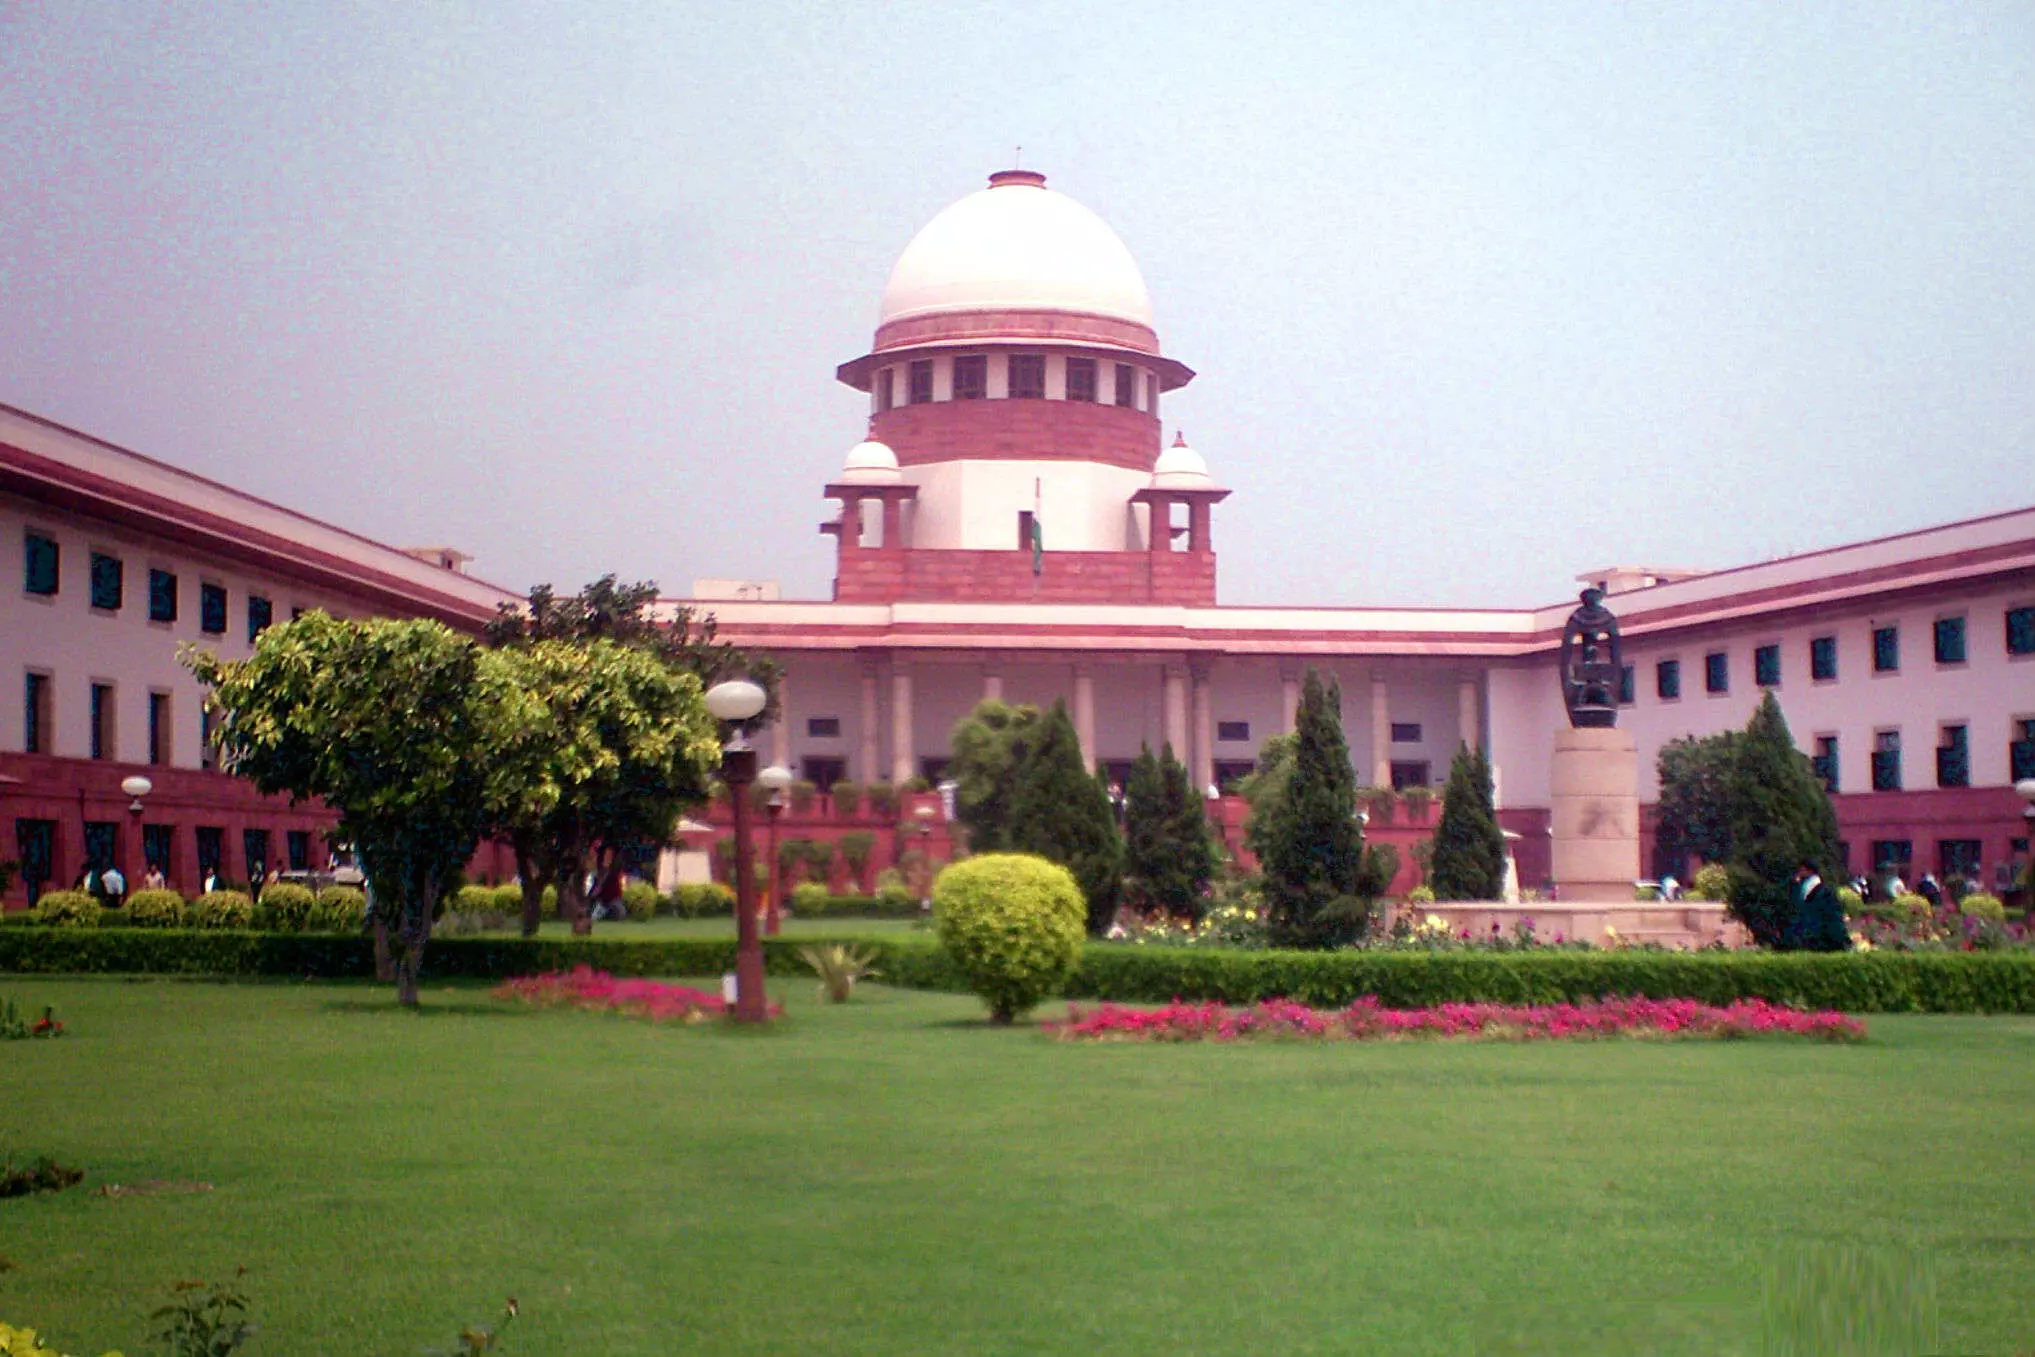 Hate speech: Contempt charges if govt fails to act, says SC